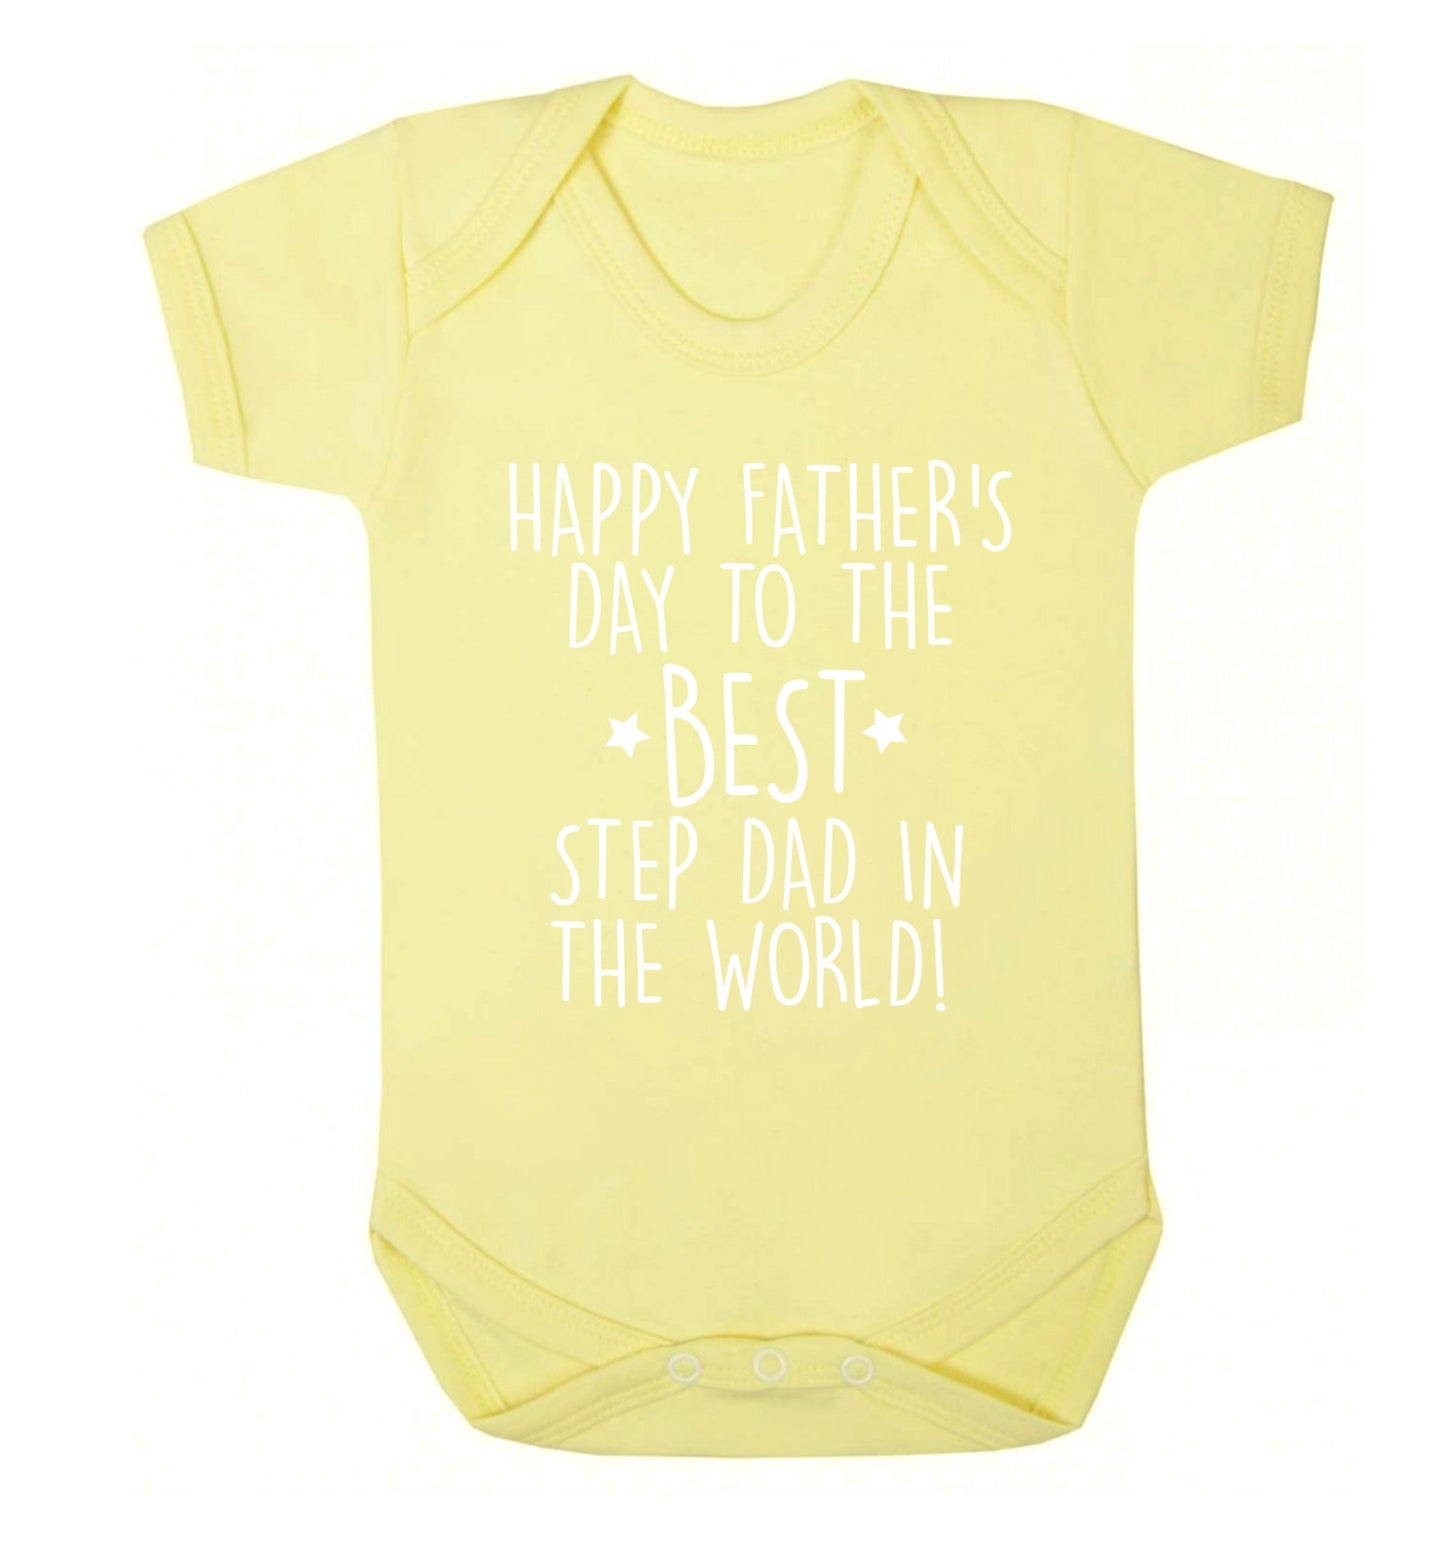 Happy Father's day to the best step dad in the world! Baby Vest pale yellow 18-24 months